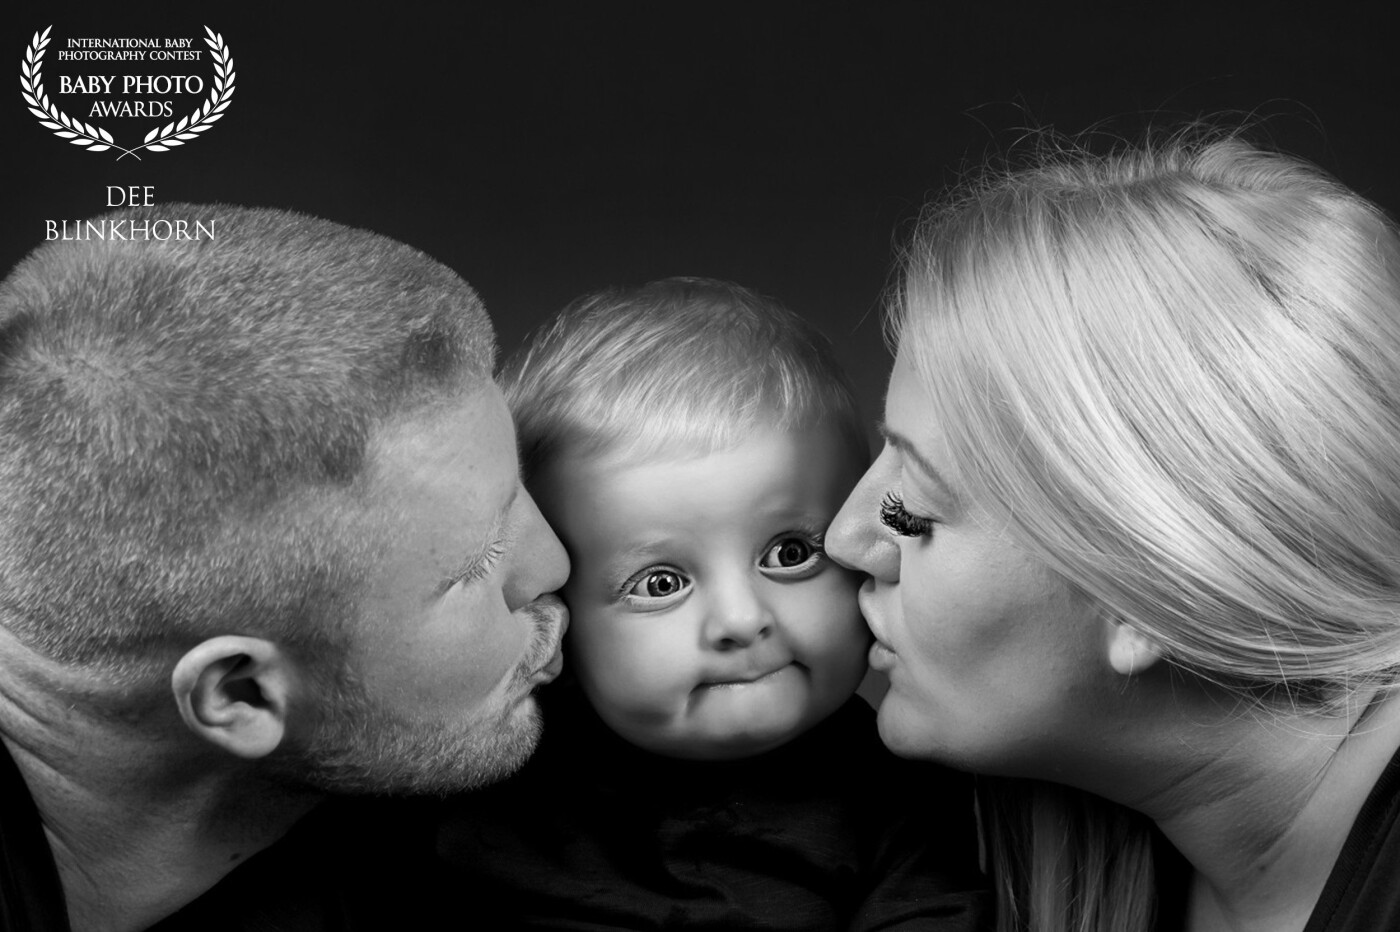 Absolutely love this little mans expression when mummy and daddy planted a kiss on each cheek priceless. Loved the black and white tones too. 